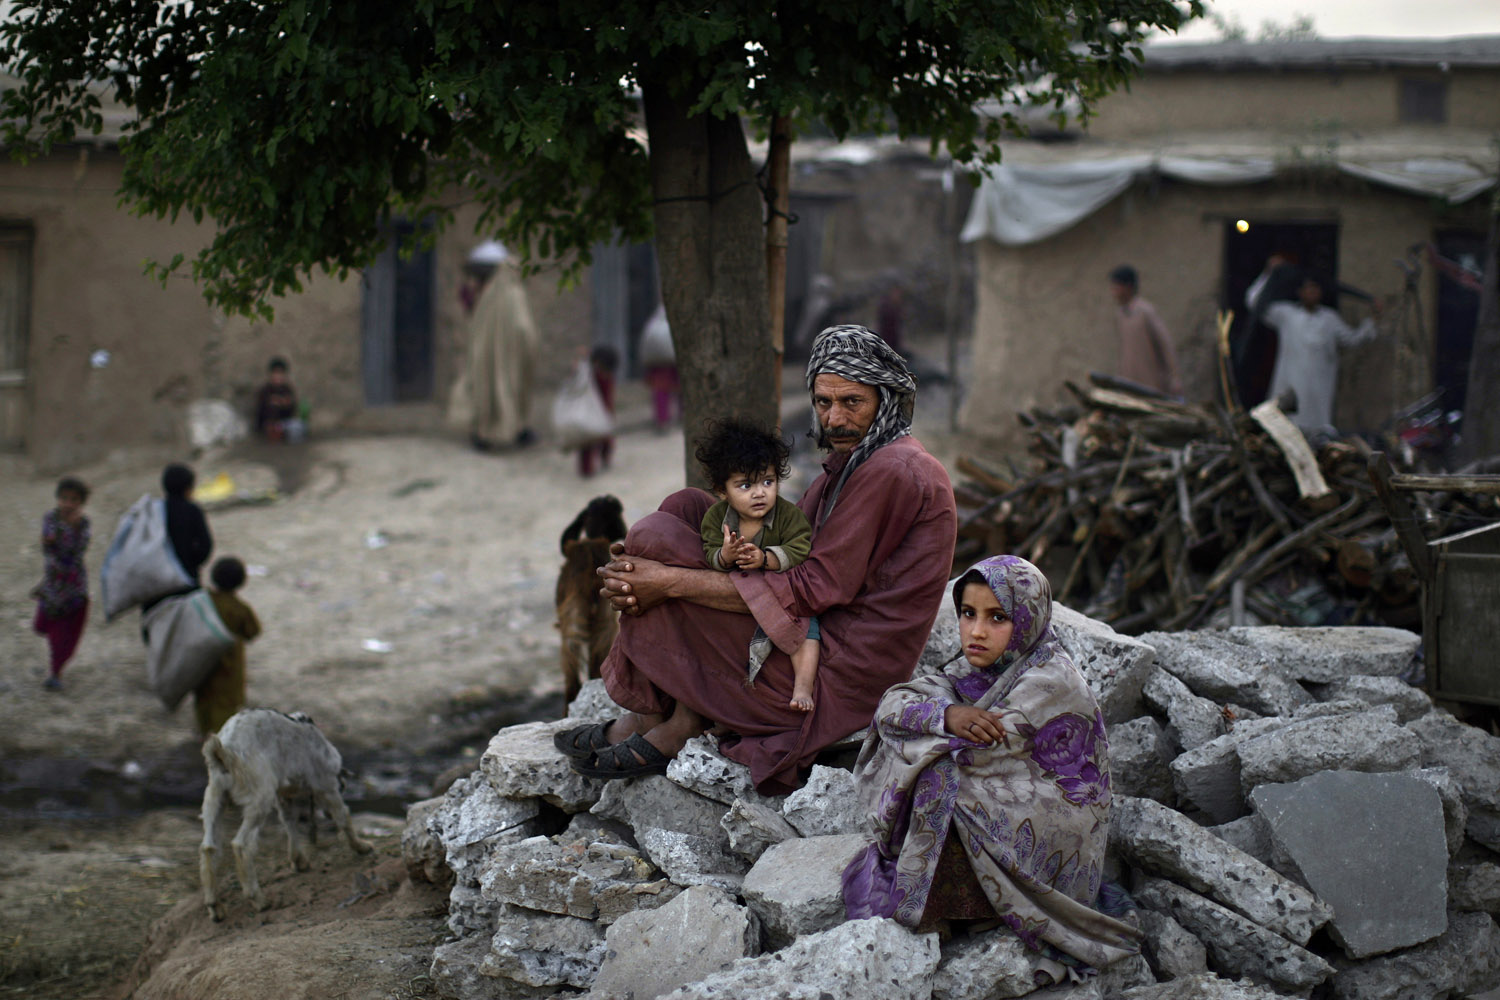 April 11, 2013. Pakistani daily laborer Wakeel Mohammed, 38, sits on a roadside with his daughter Halimah, 1, on his lap and his relative Khadijah, 7, right, near their home, in a poor neighborhood on the outskirts of Islamabad. Wakeel and his family fled Pakistan's tribal region of Mohmand Agency, due to fighting between the Taliban and the army, and took refuge in Islamabad.